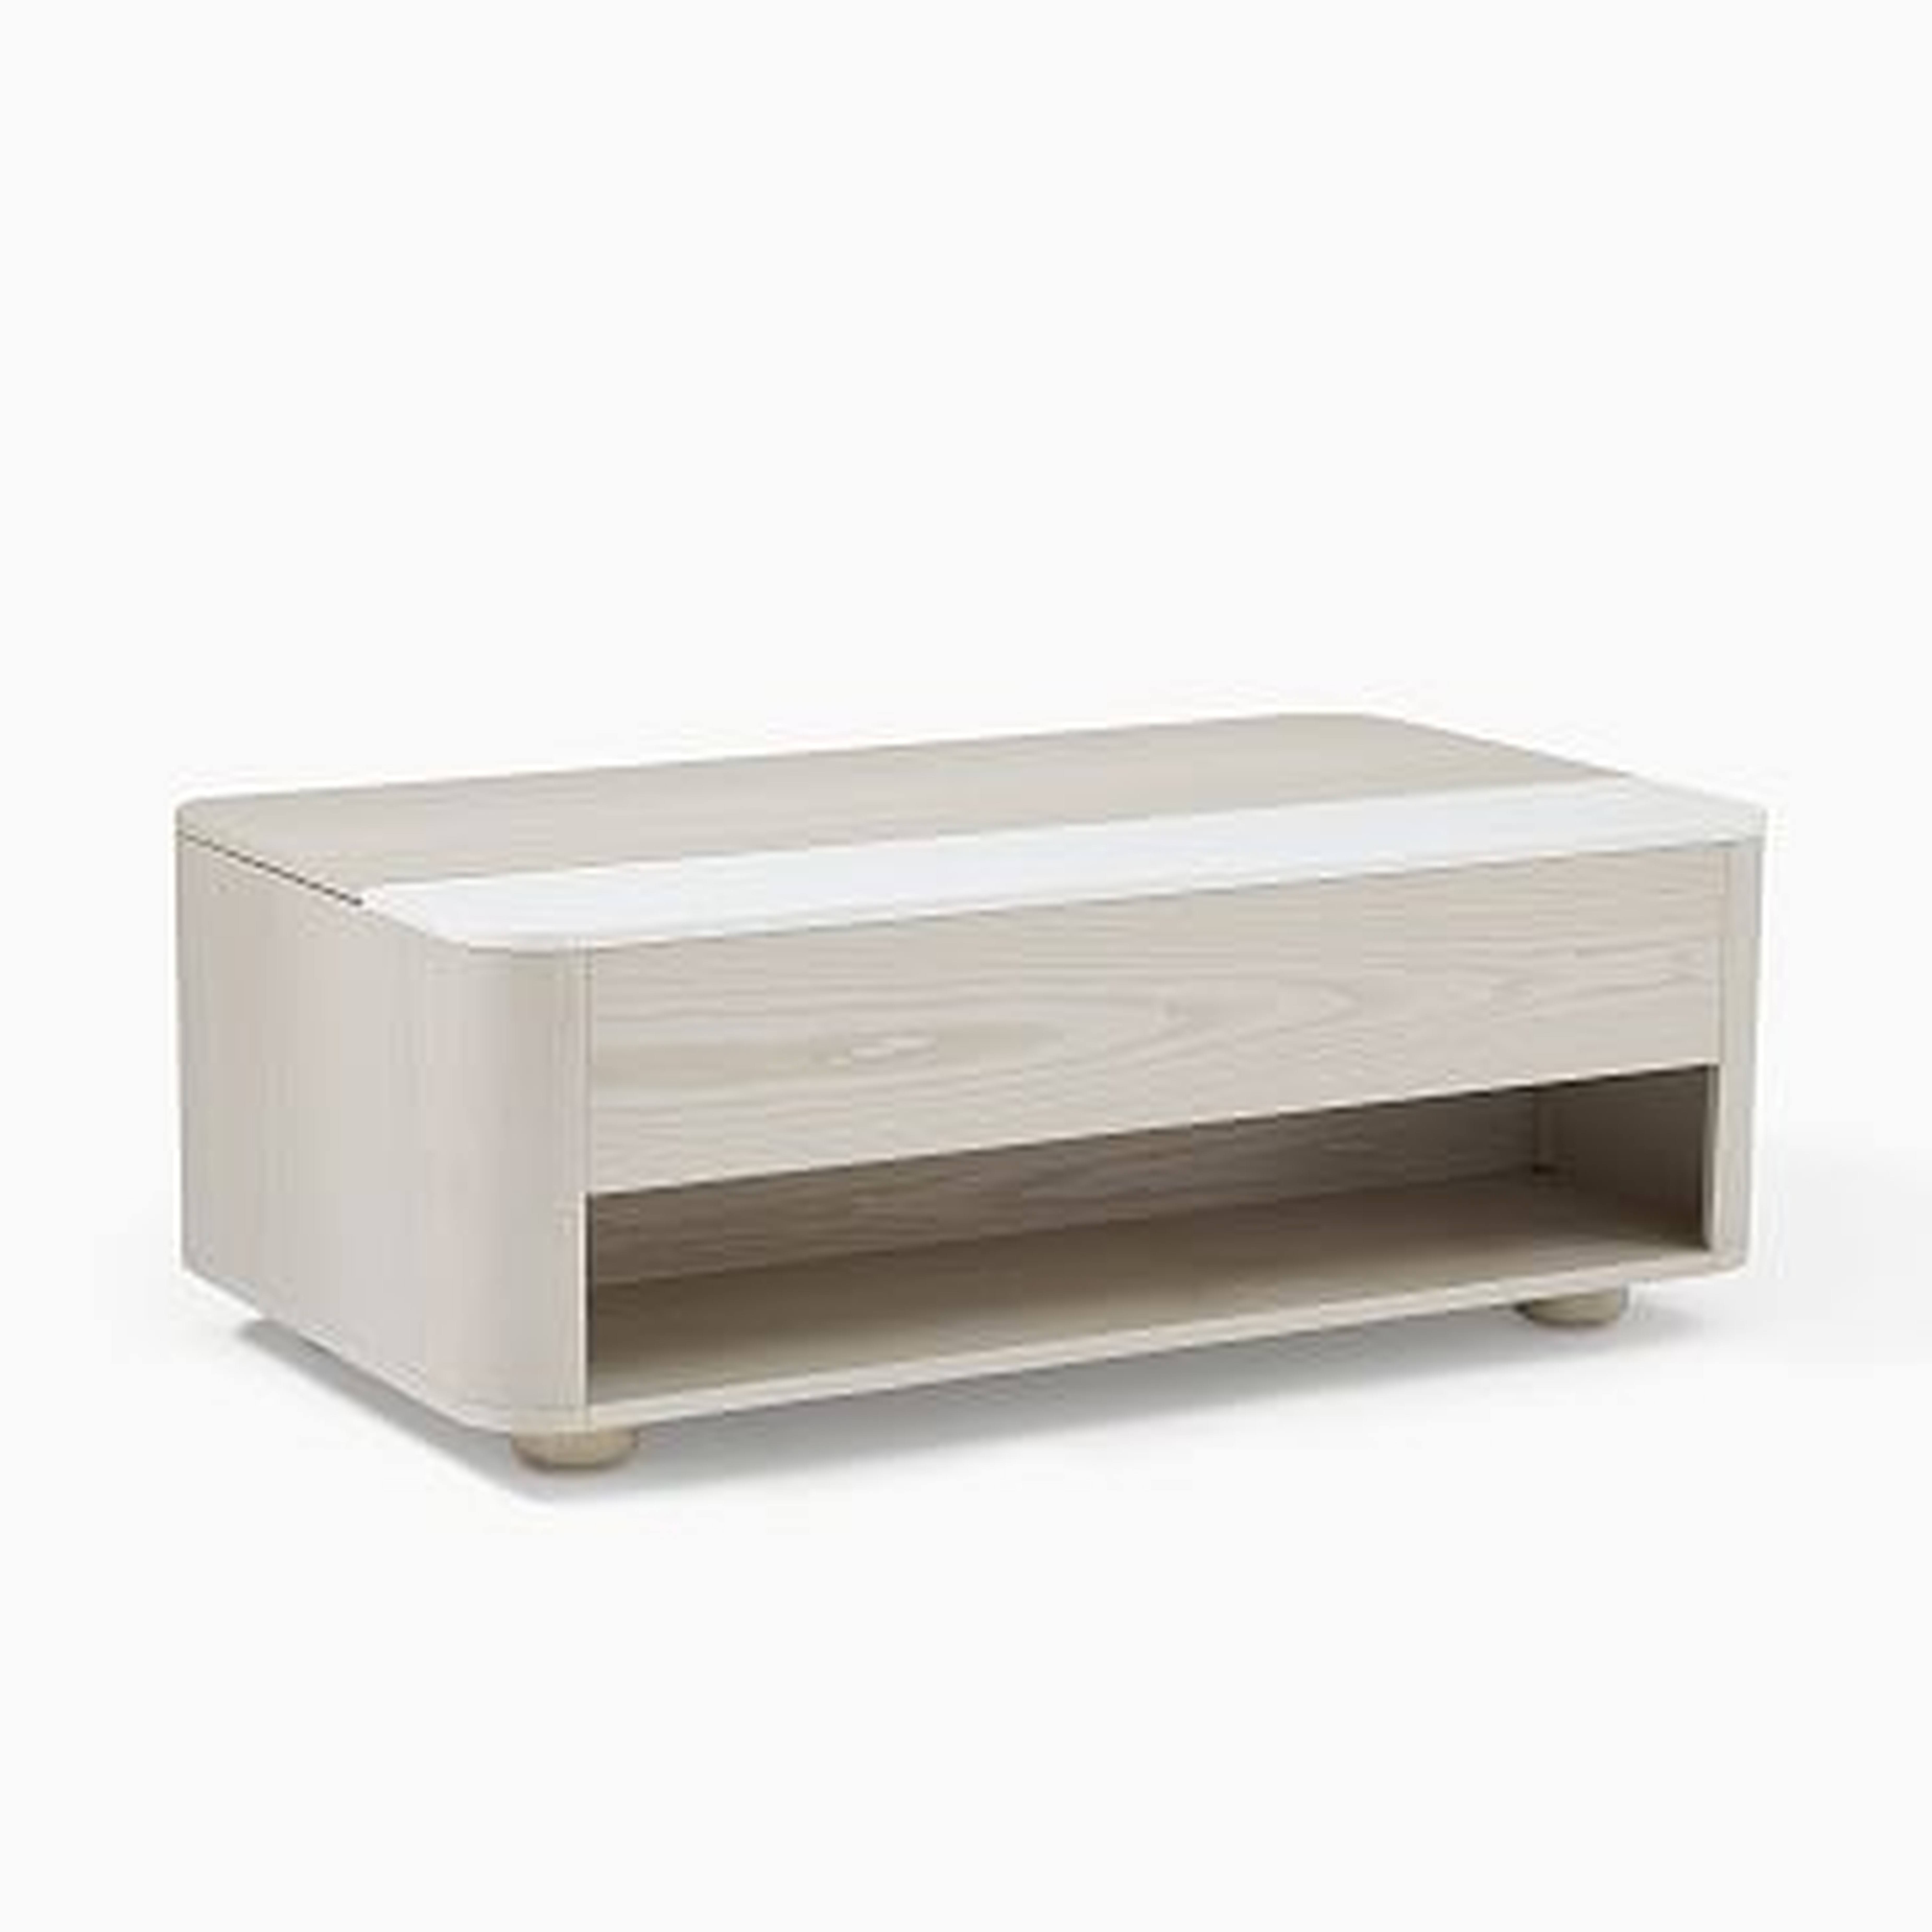 Panorama Pop-Up Storage Coffee Table, Feather Gray Marble - West Elm